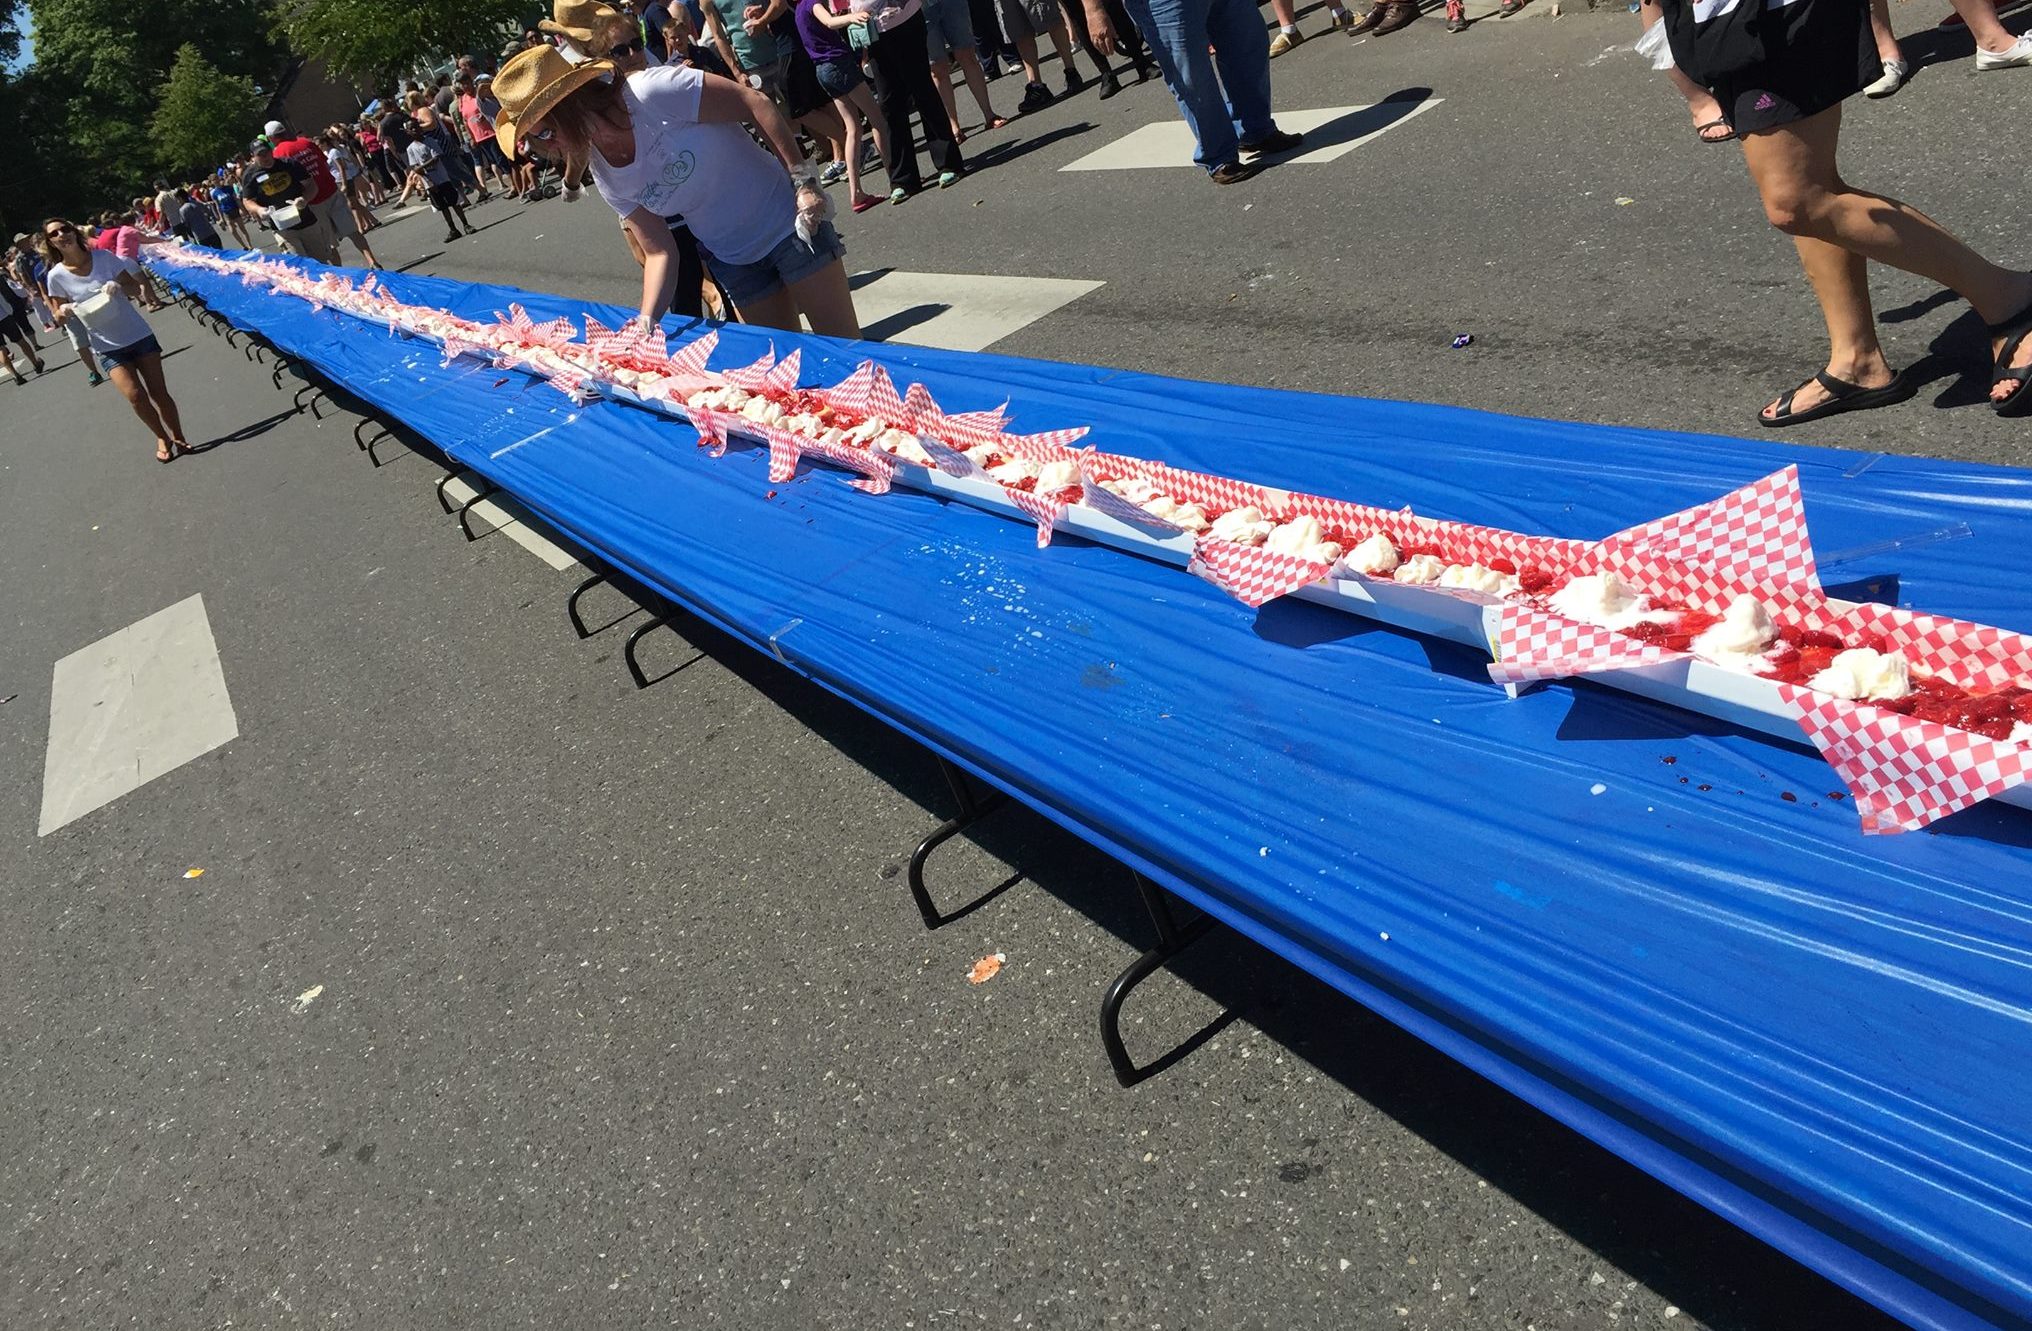 Here it is: video footage of the World’s Longest Strawberry Shortcake for Lynden’s 125th!